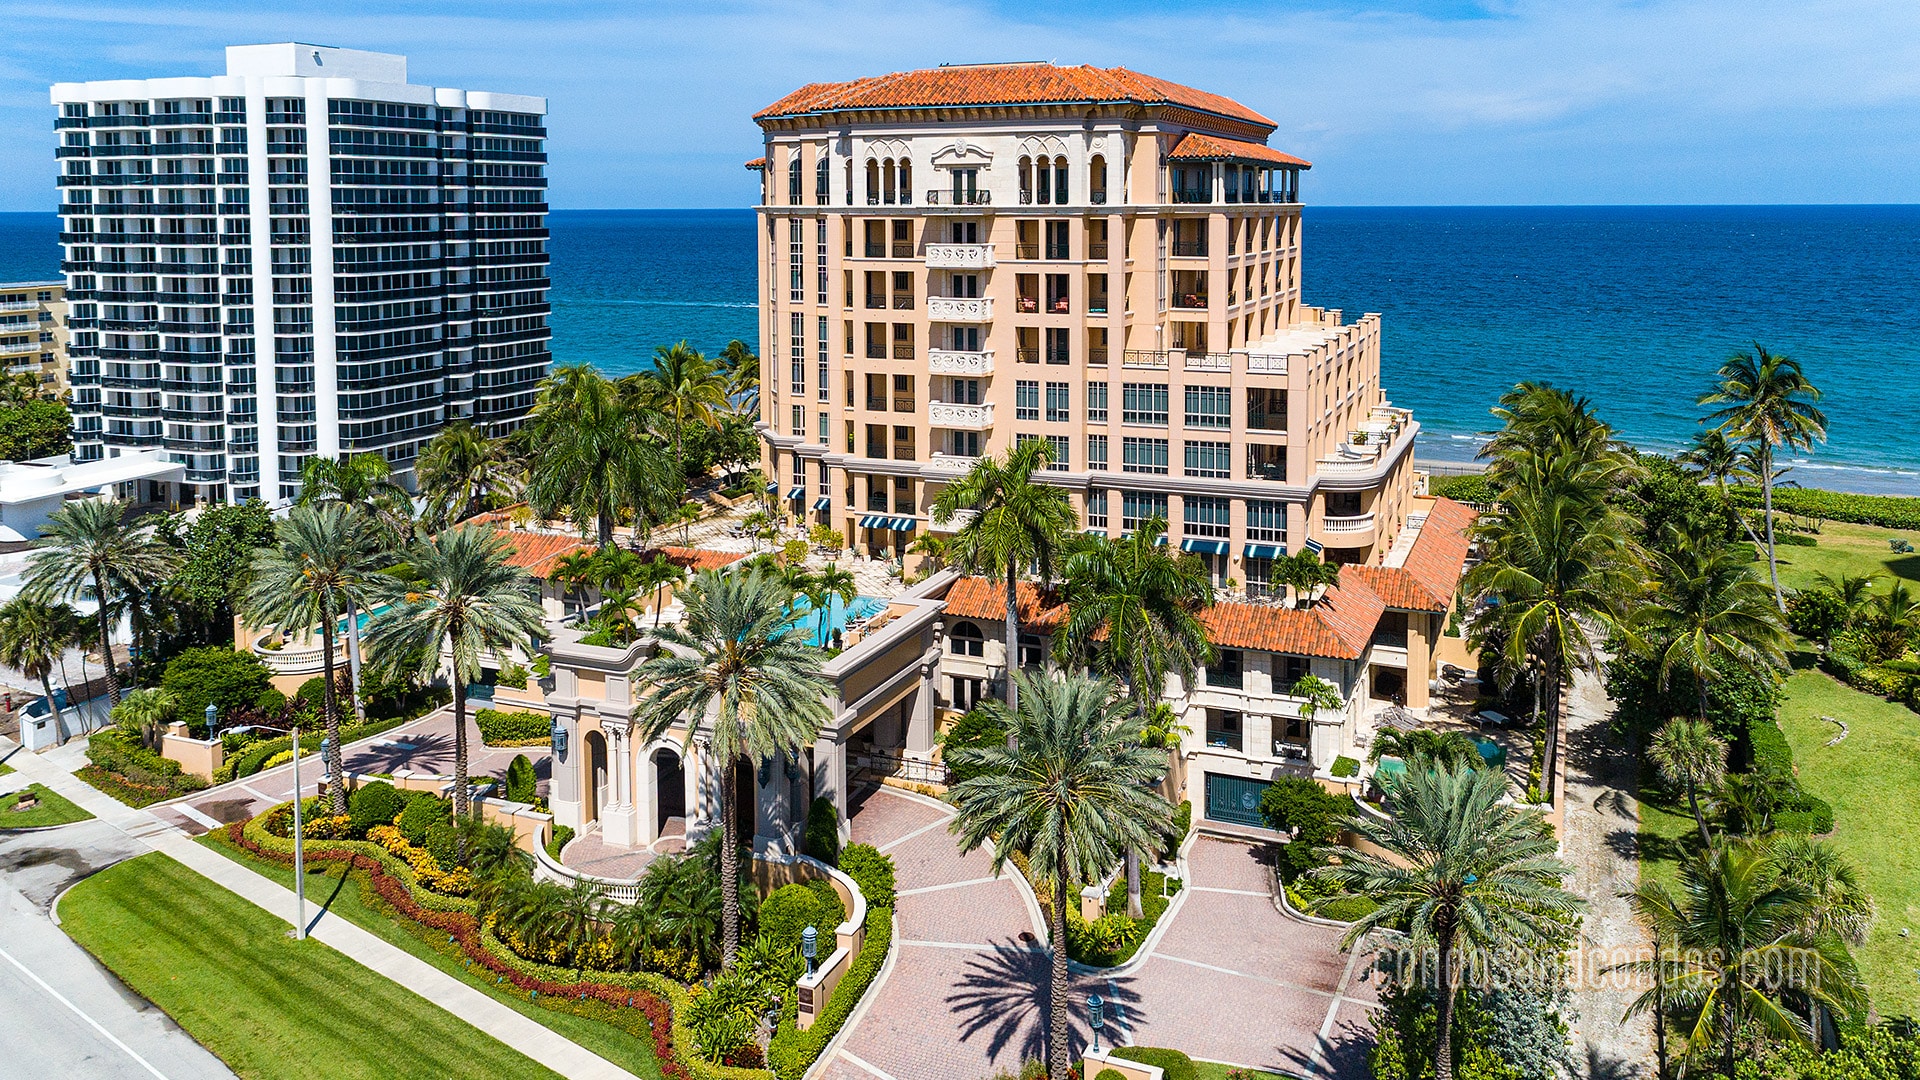 Condos in Boca Raton, FL With Must-See Design Finishes and Features